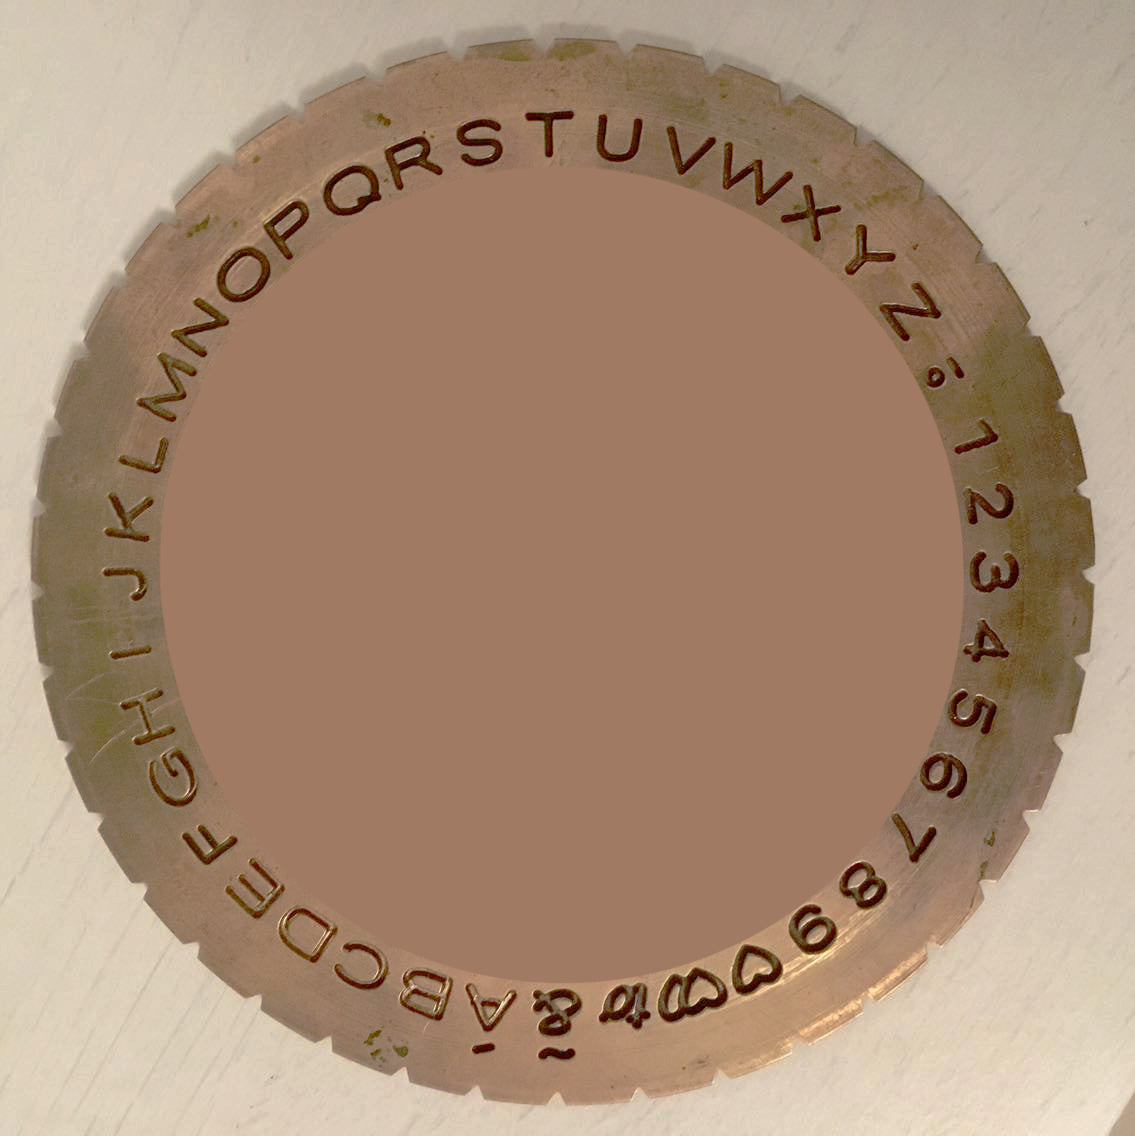 Optional secret message engraving for CYS •RINGS•